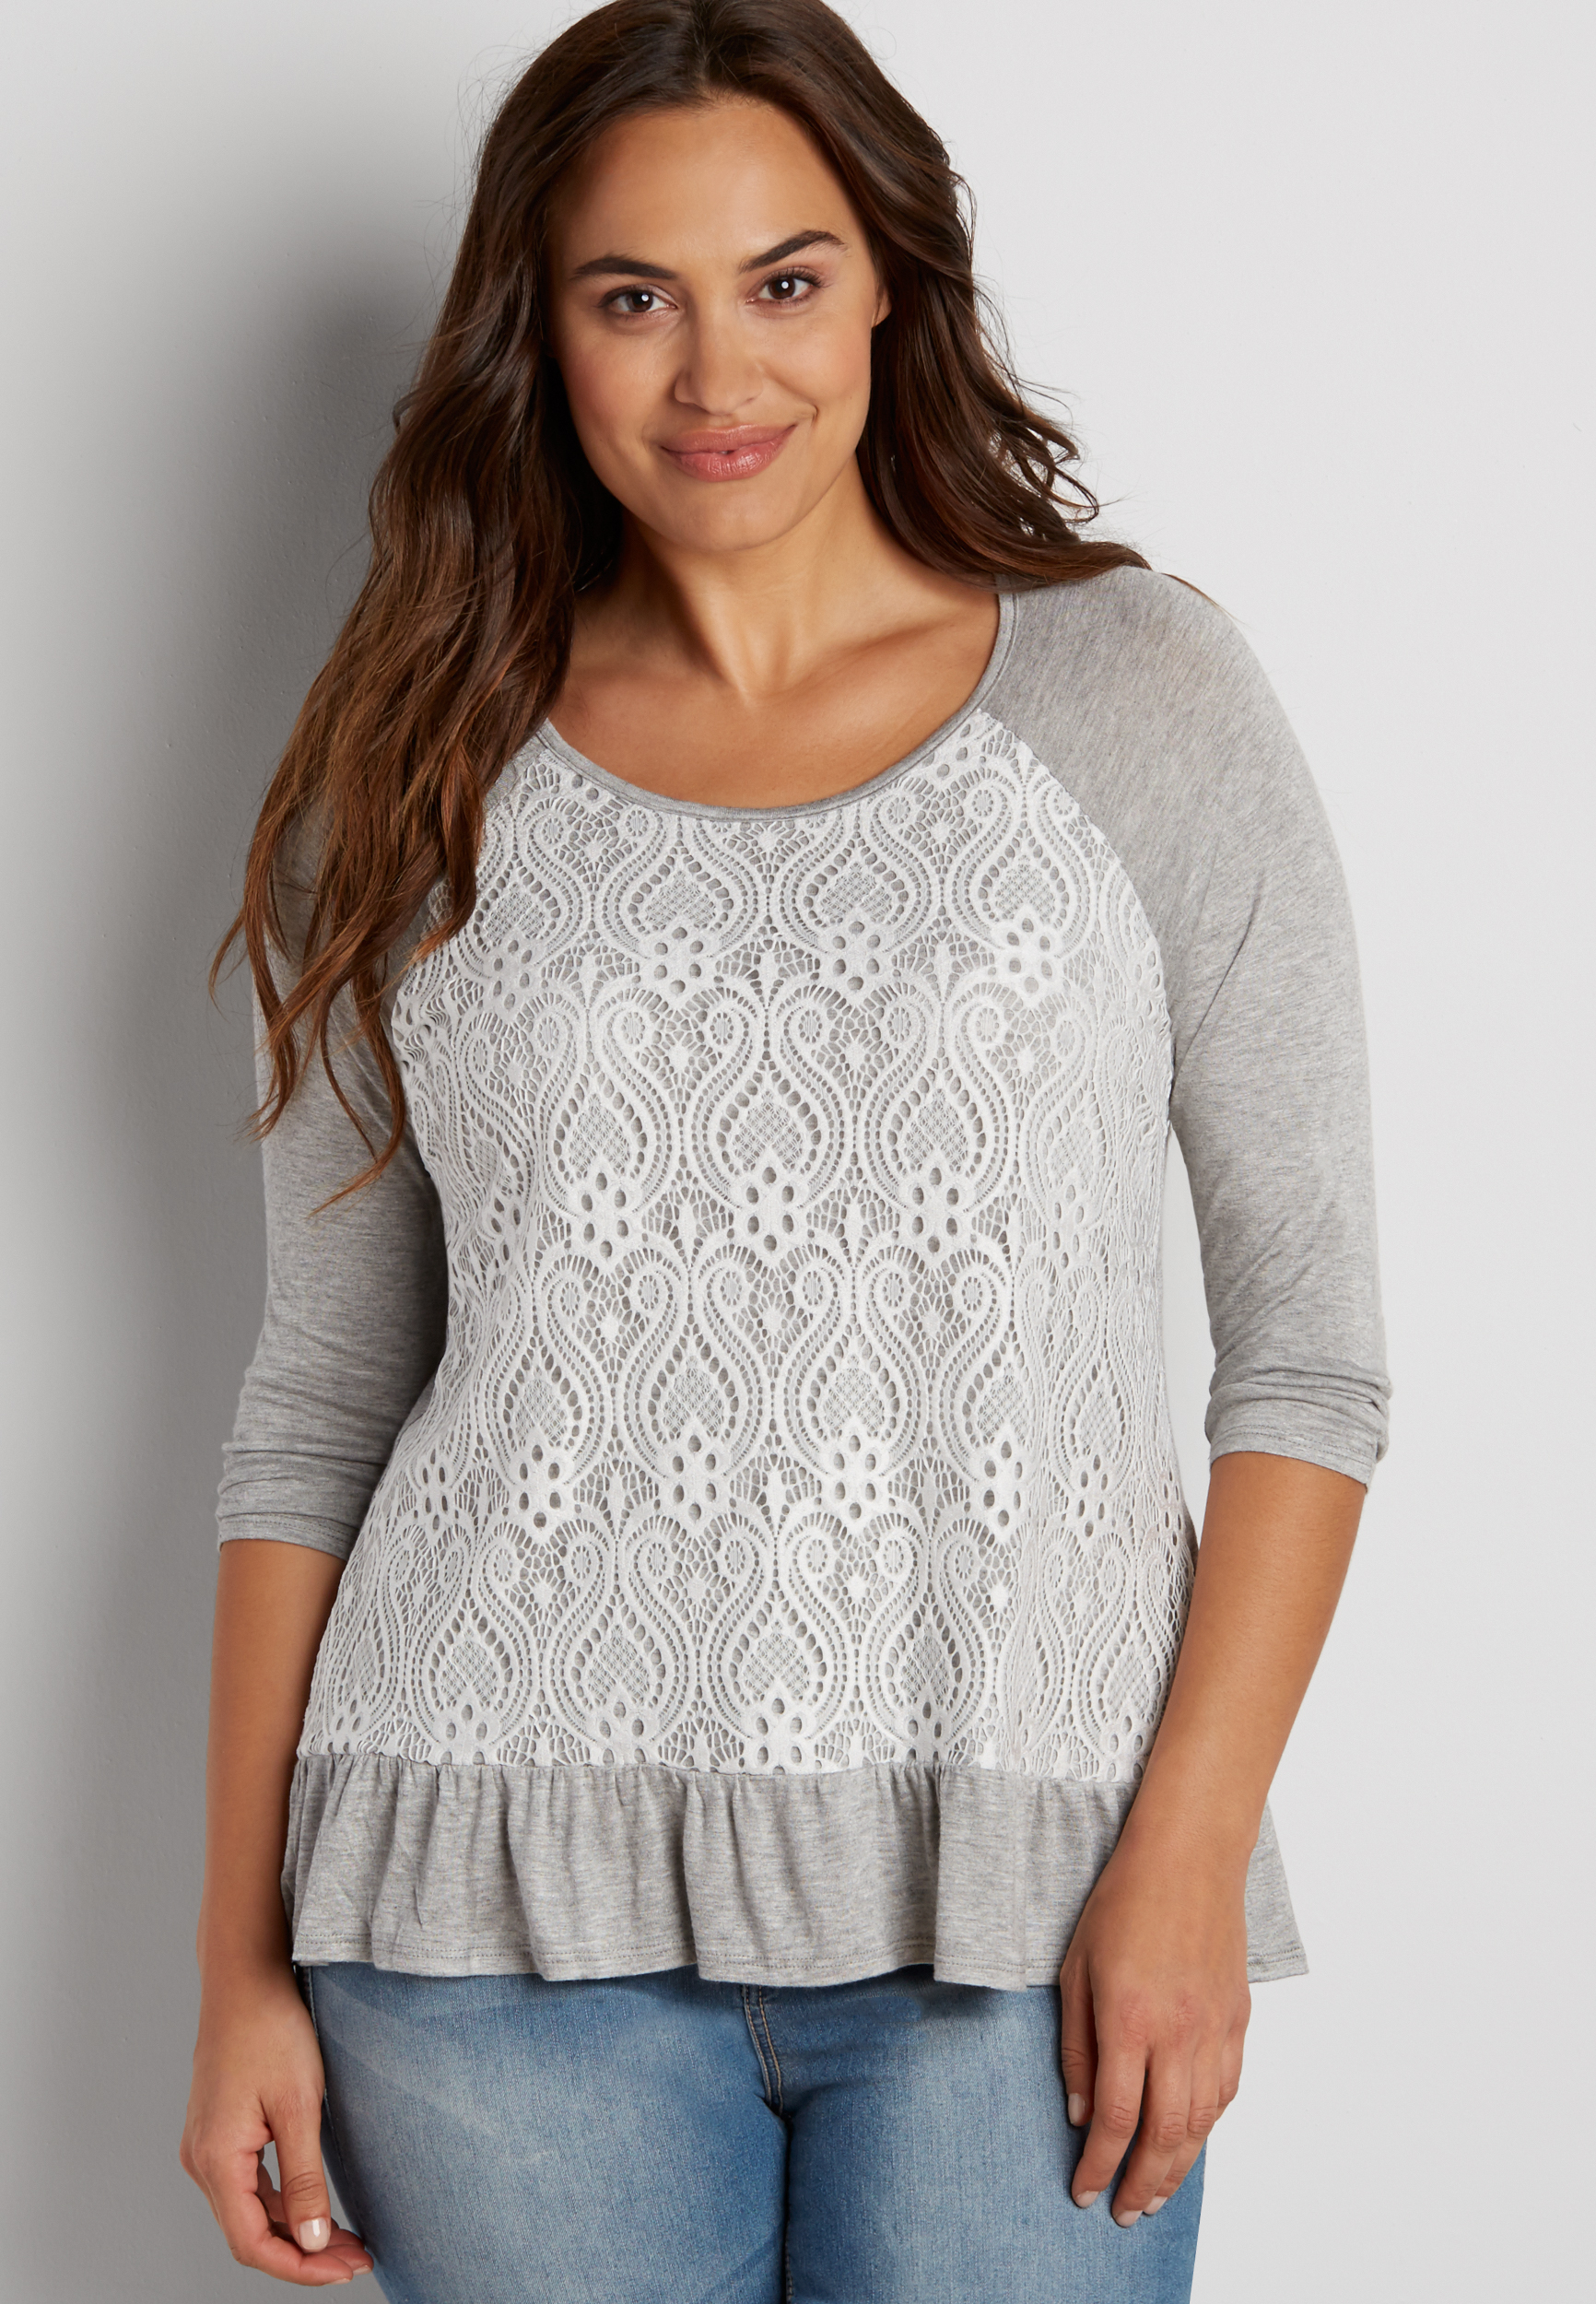 plus size tee with lace overlay and ruffle hem | maurices